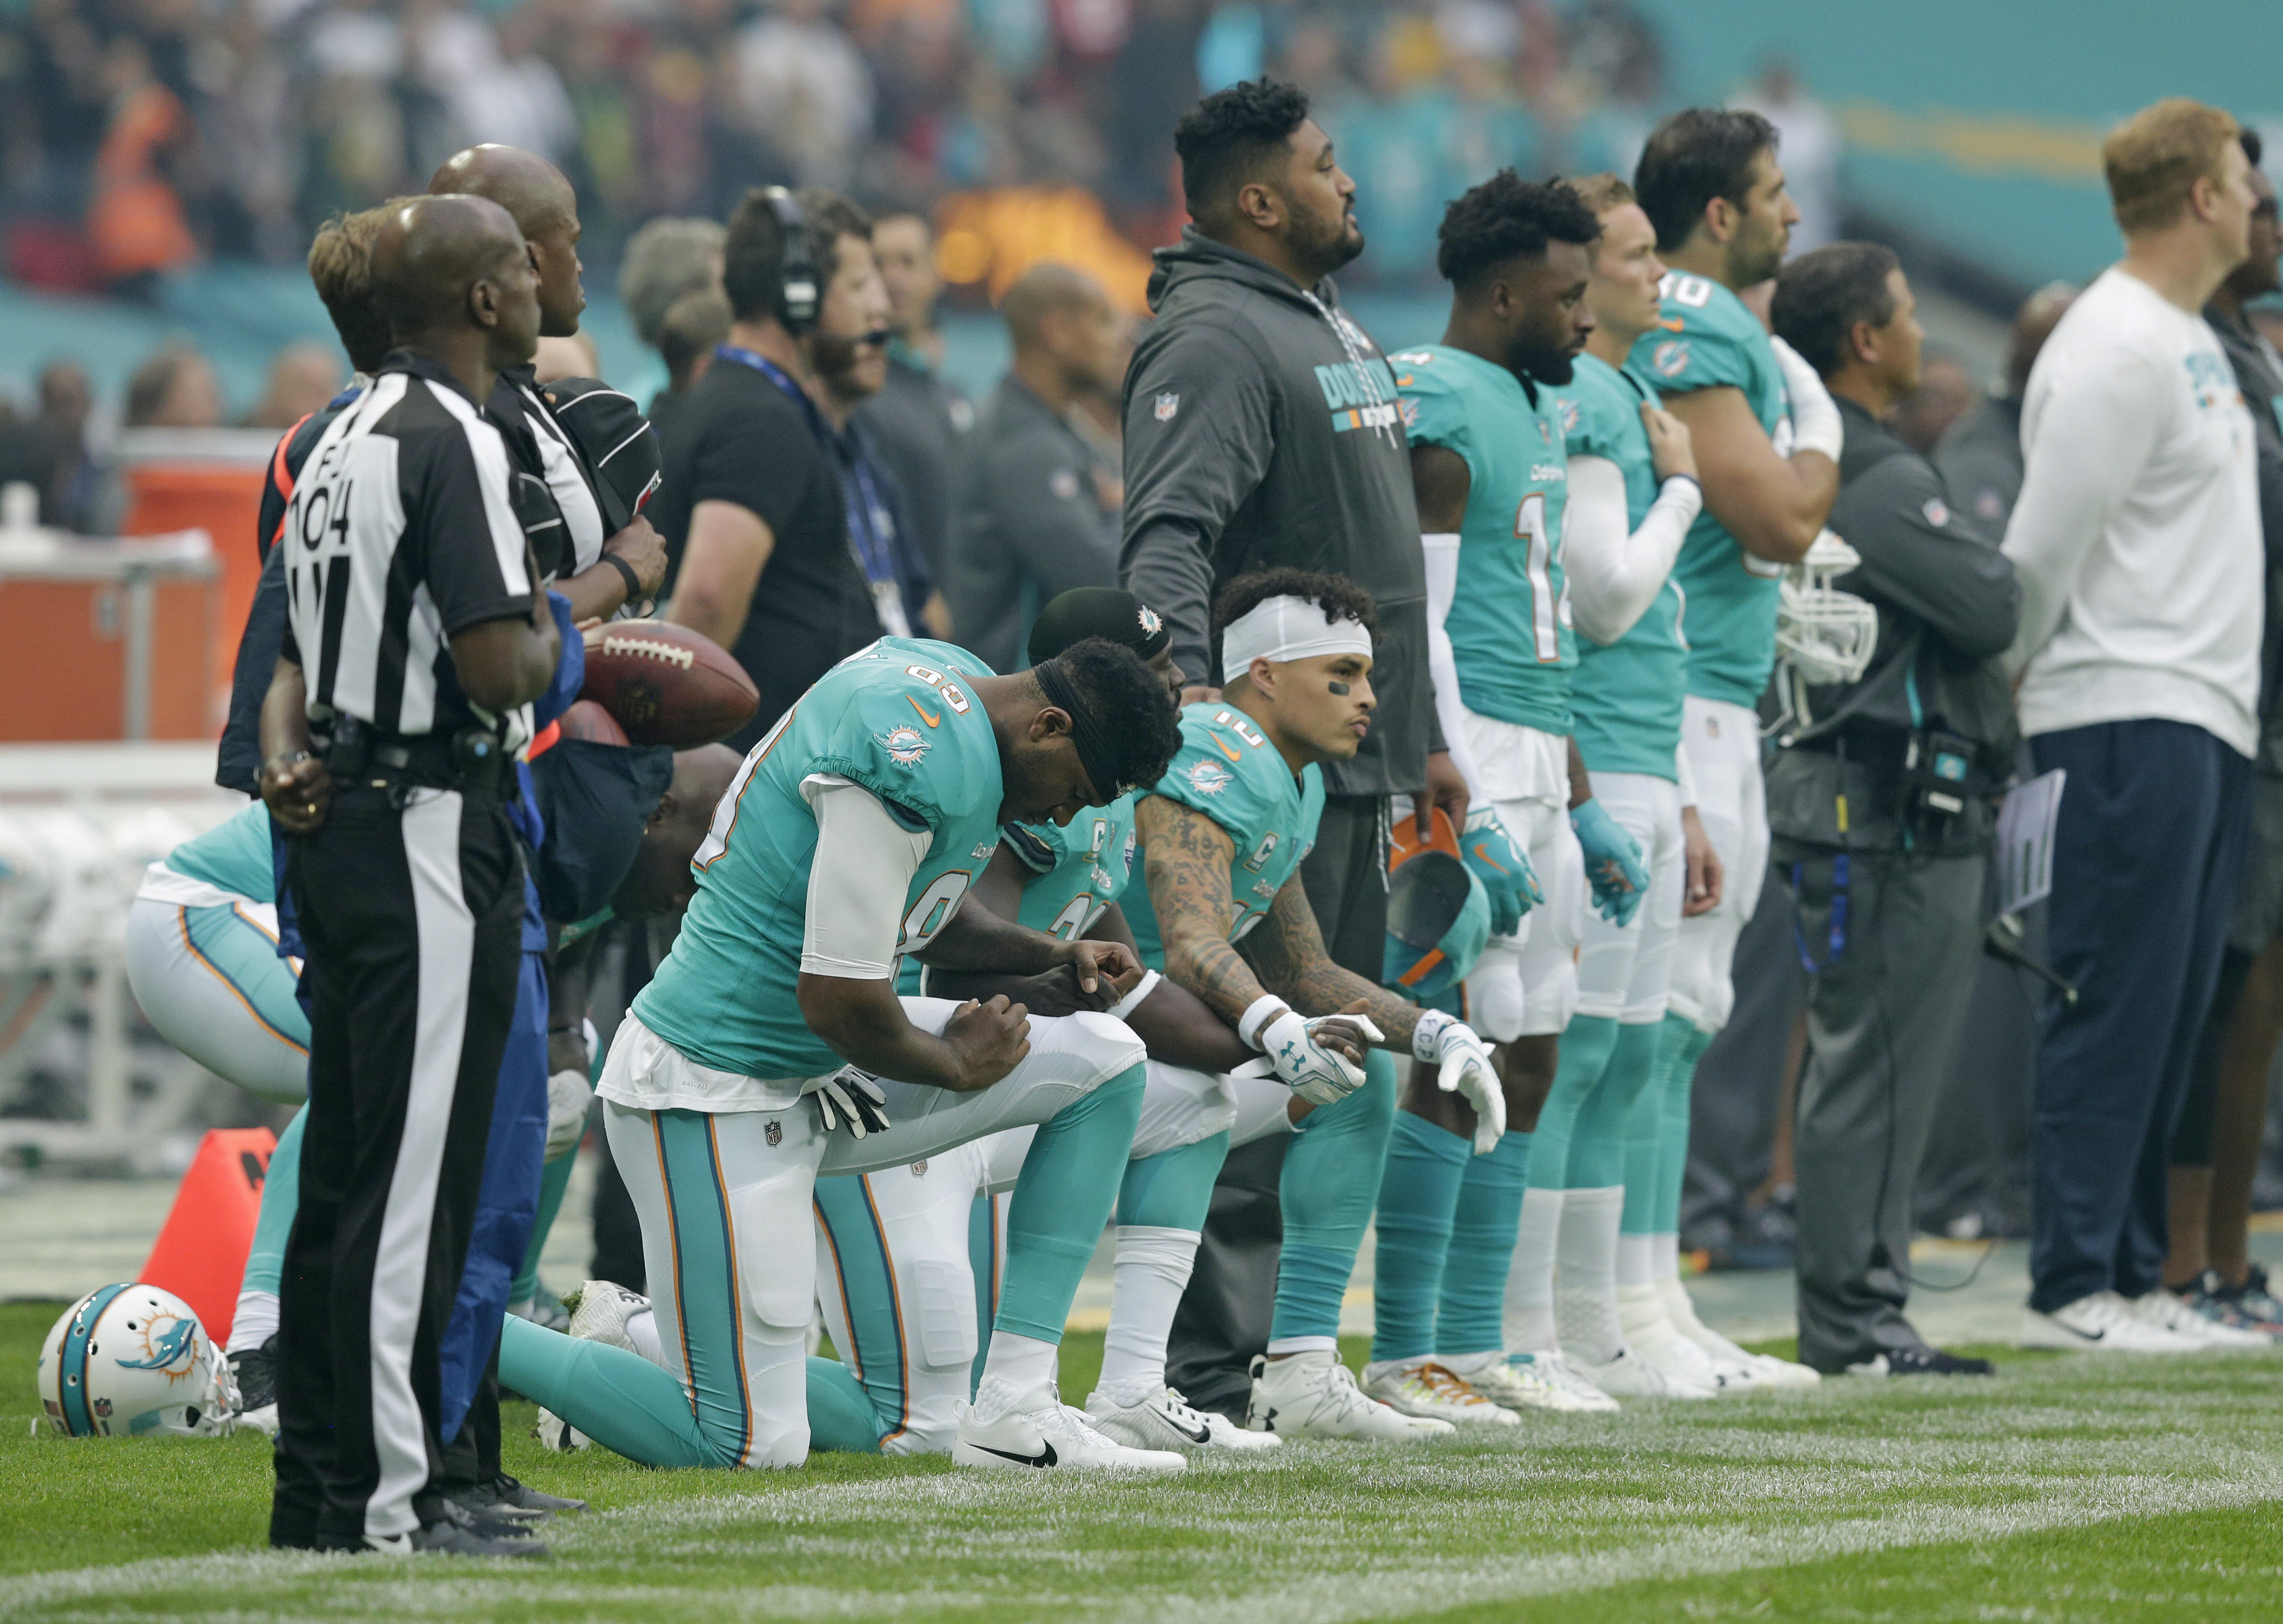 Some NFL players kneel Sunday during national anthem CBS News